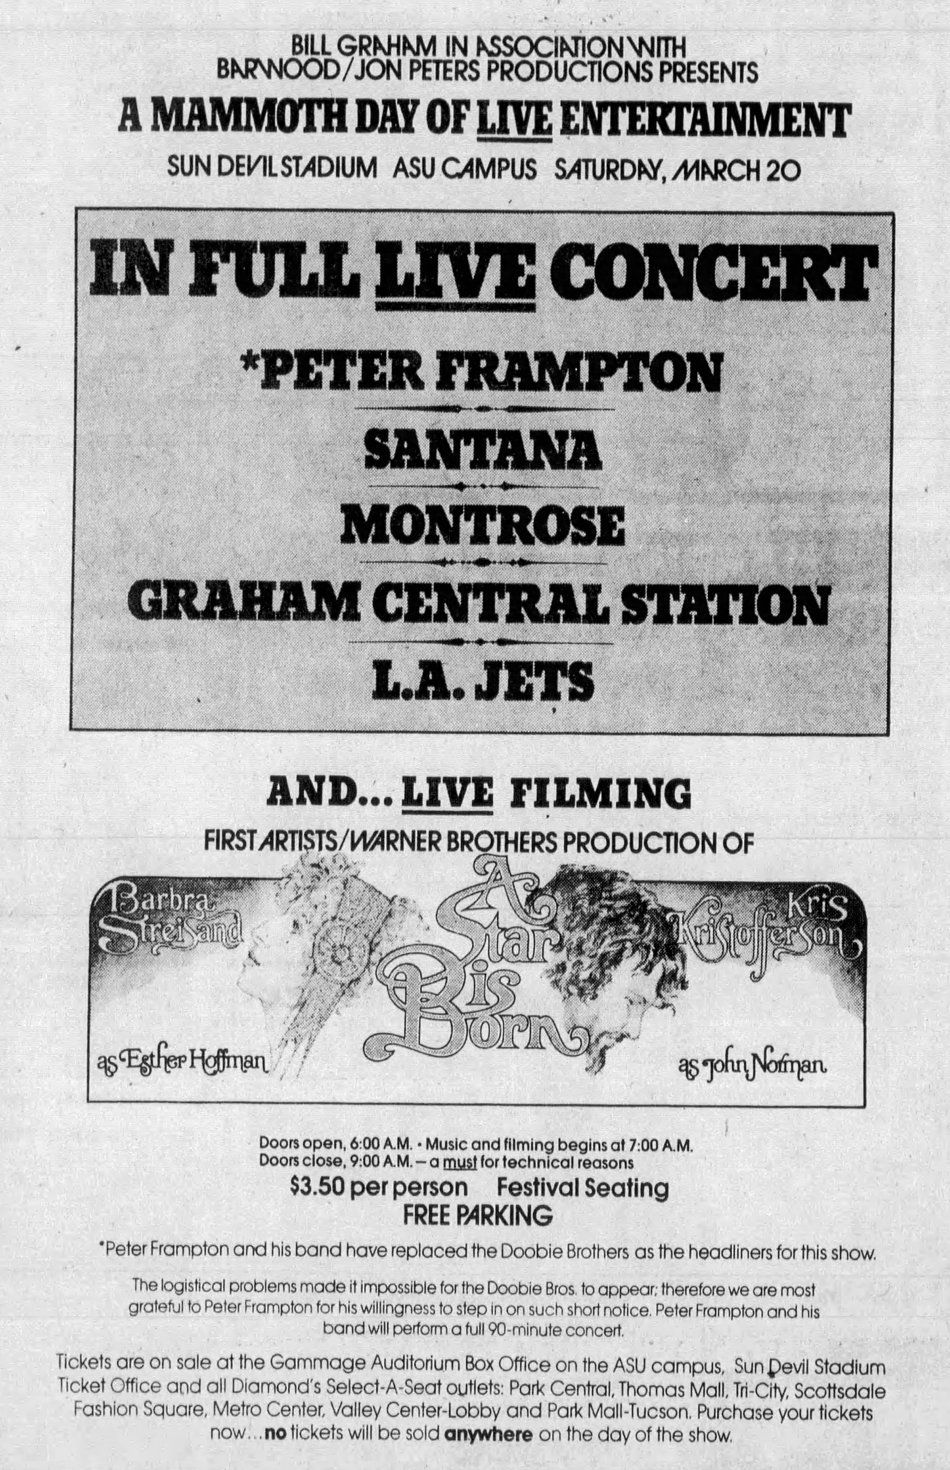 Newspaper advertisement for the concert